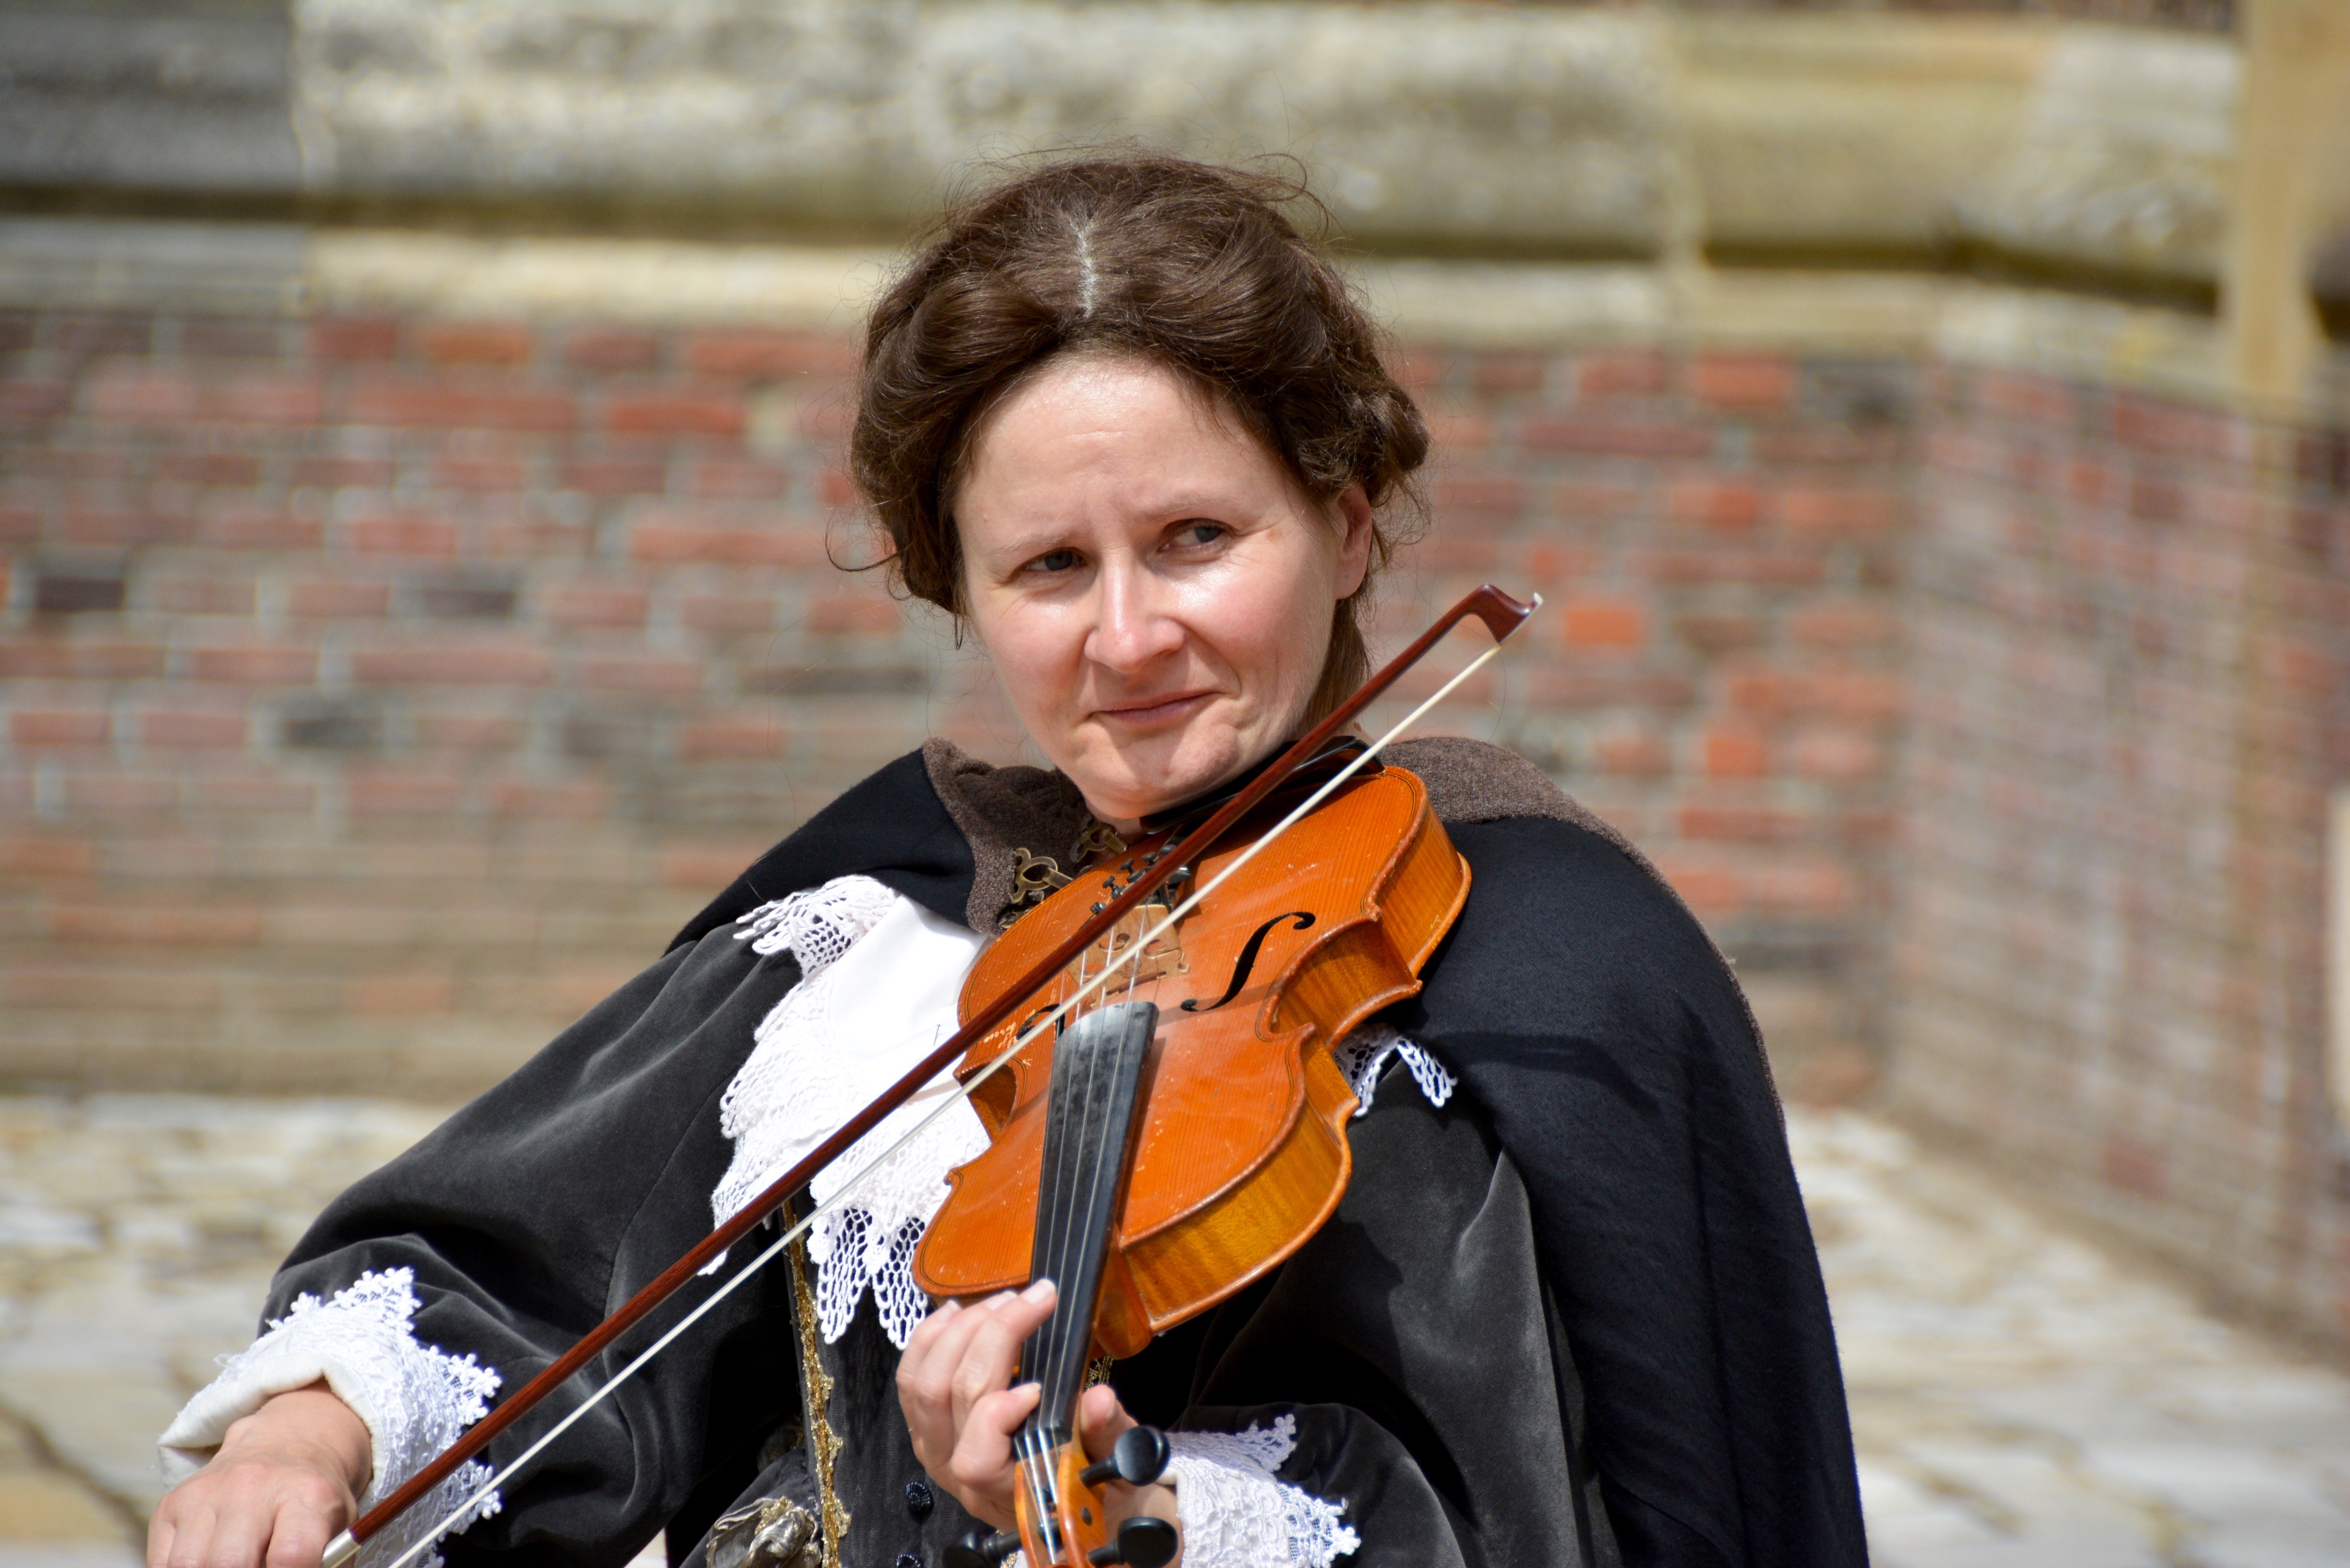 This strolling musician was photographed at Hampton Court Palace 